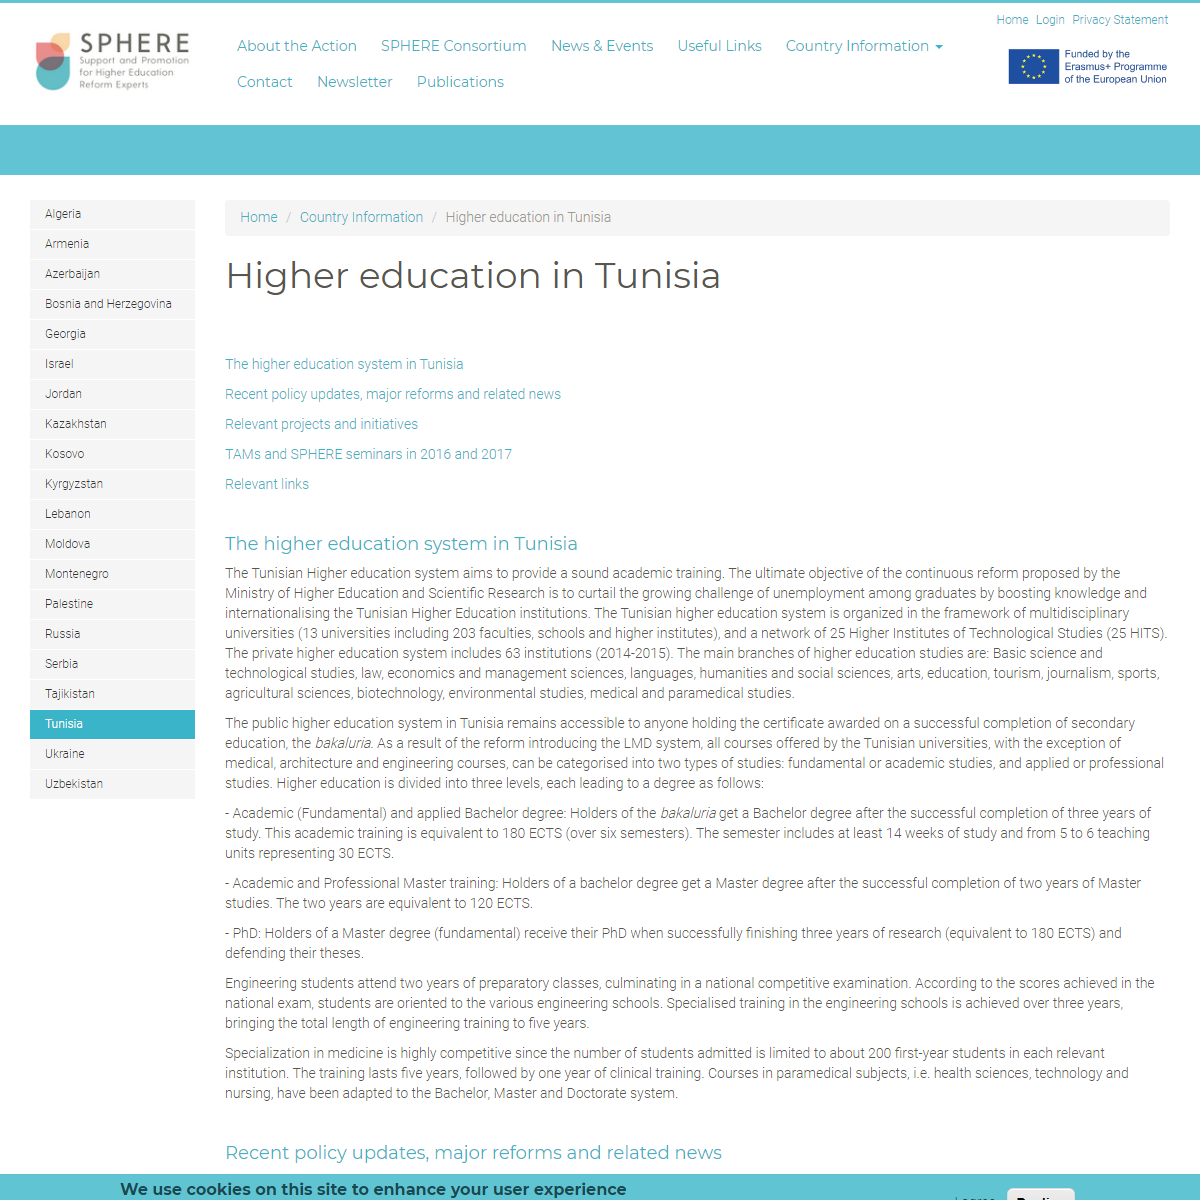 A complete backup of https://supporthere.org/page/higher-education-tunisia